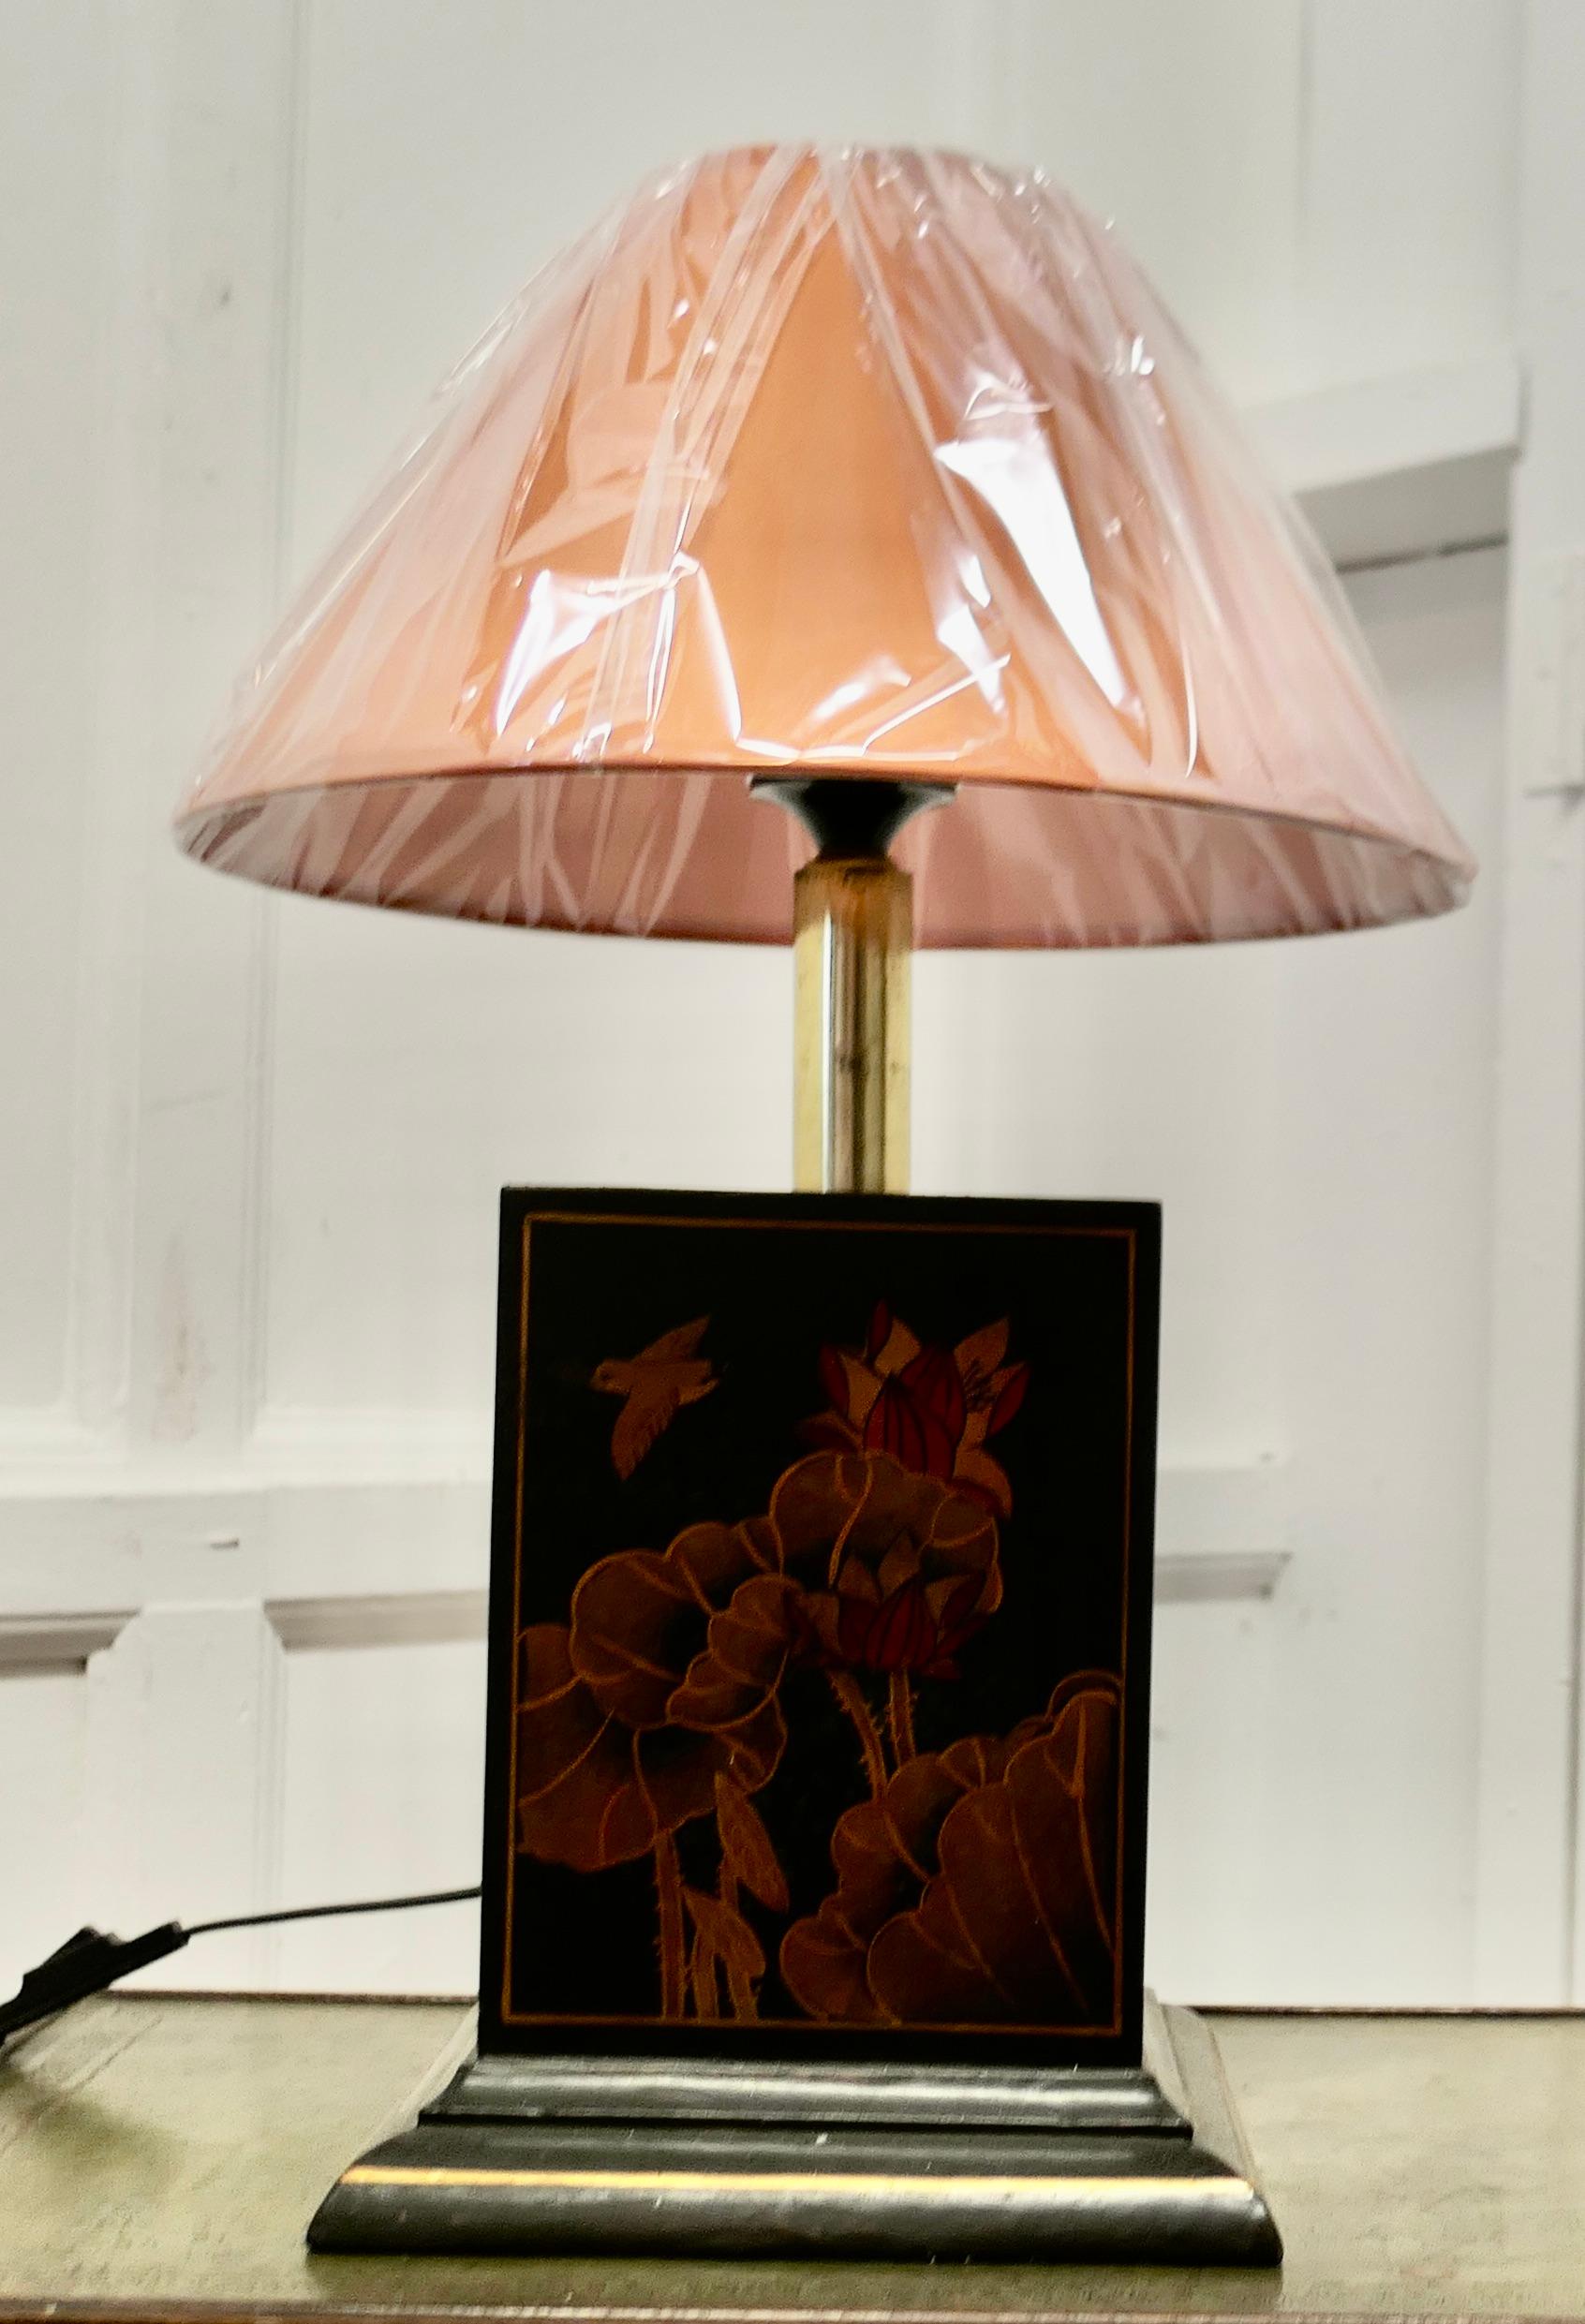 A Large Oriental Lacquer Cube Sideboard Lamp

The lamp is made in Wood and Brass, it is lacquered in Black with flowers and birds in shades of Sienna, the lamp comes with a new Coolie Lampshade
All working and a great looker
The lamp is 21” tall, 9”